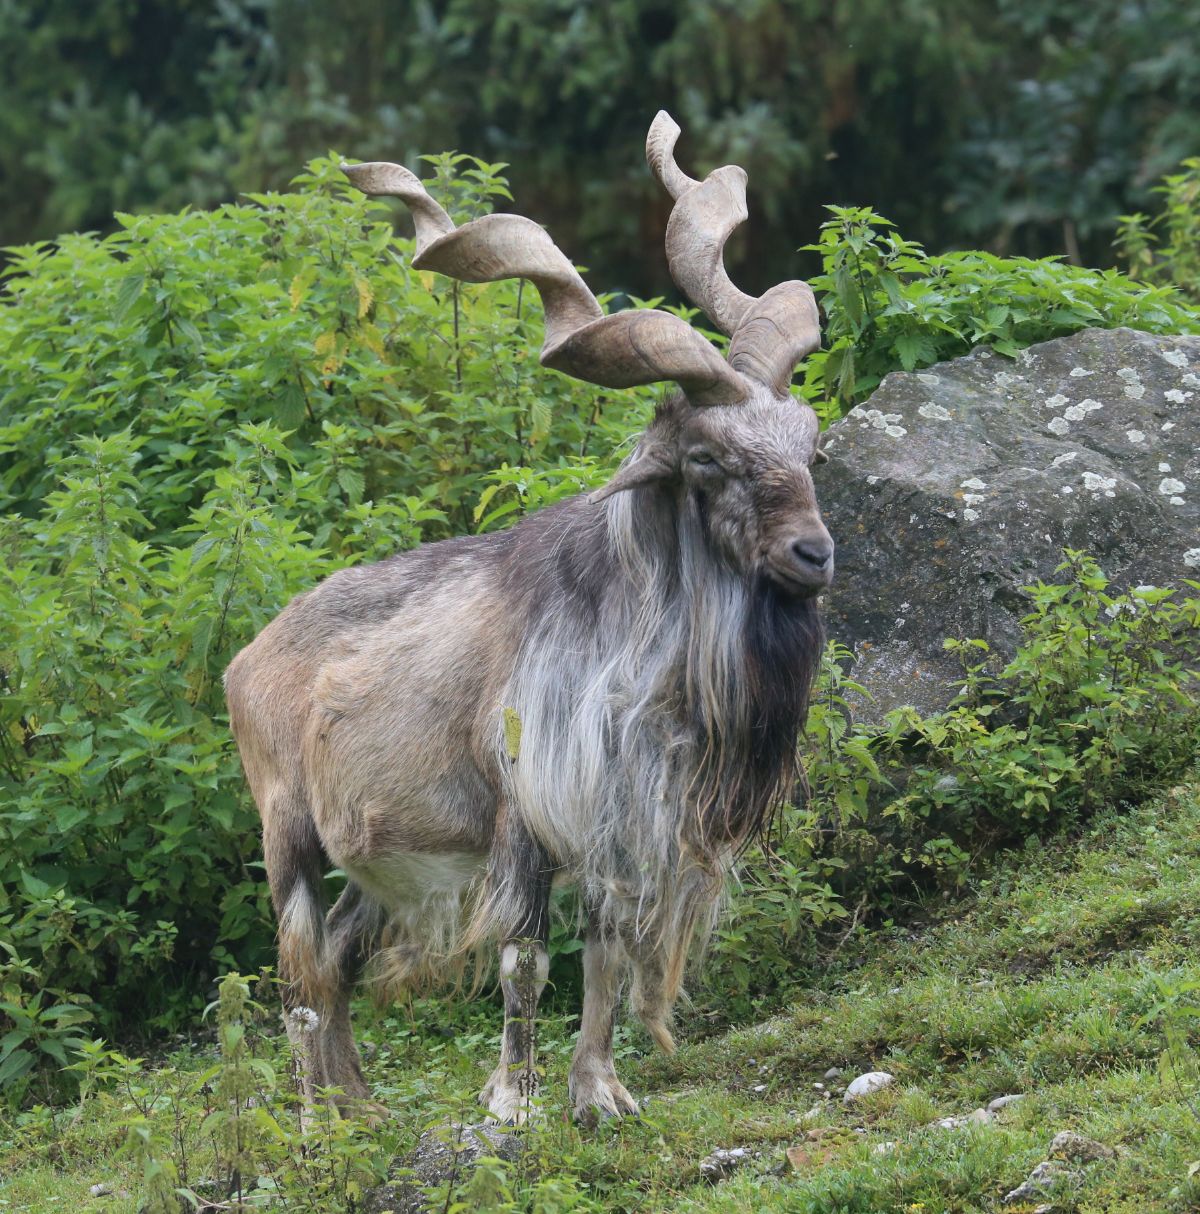 Markhors: magnificent corkscrew horned goats living high in the Himalayas |  One Earth